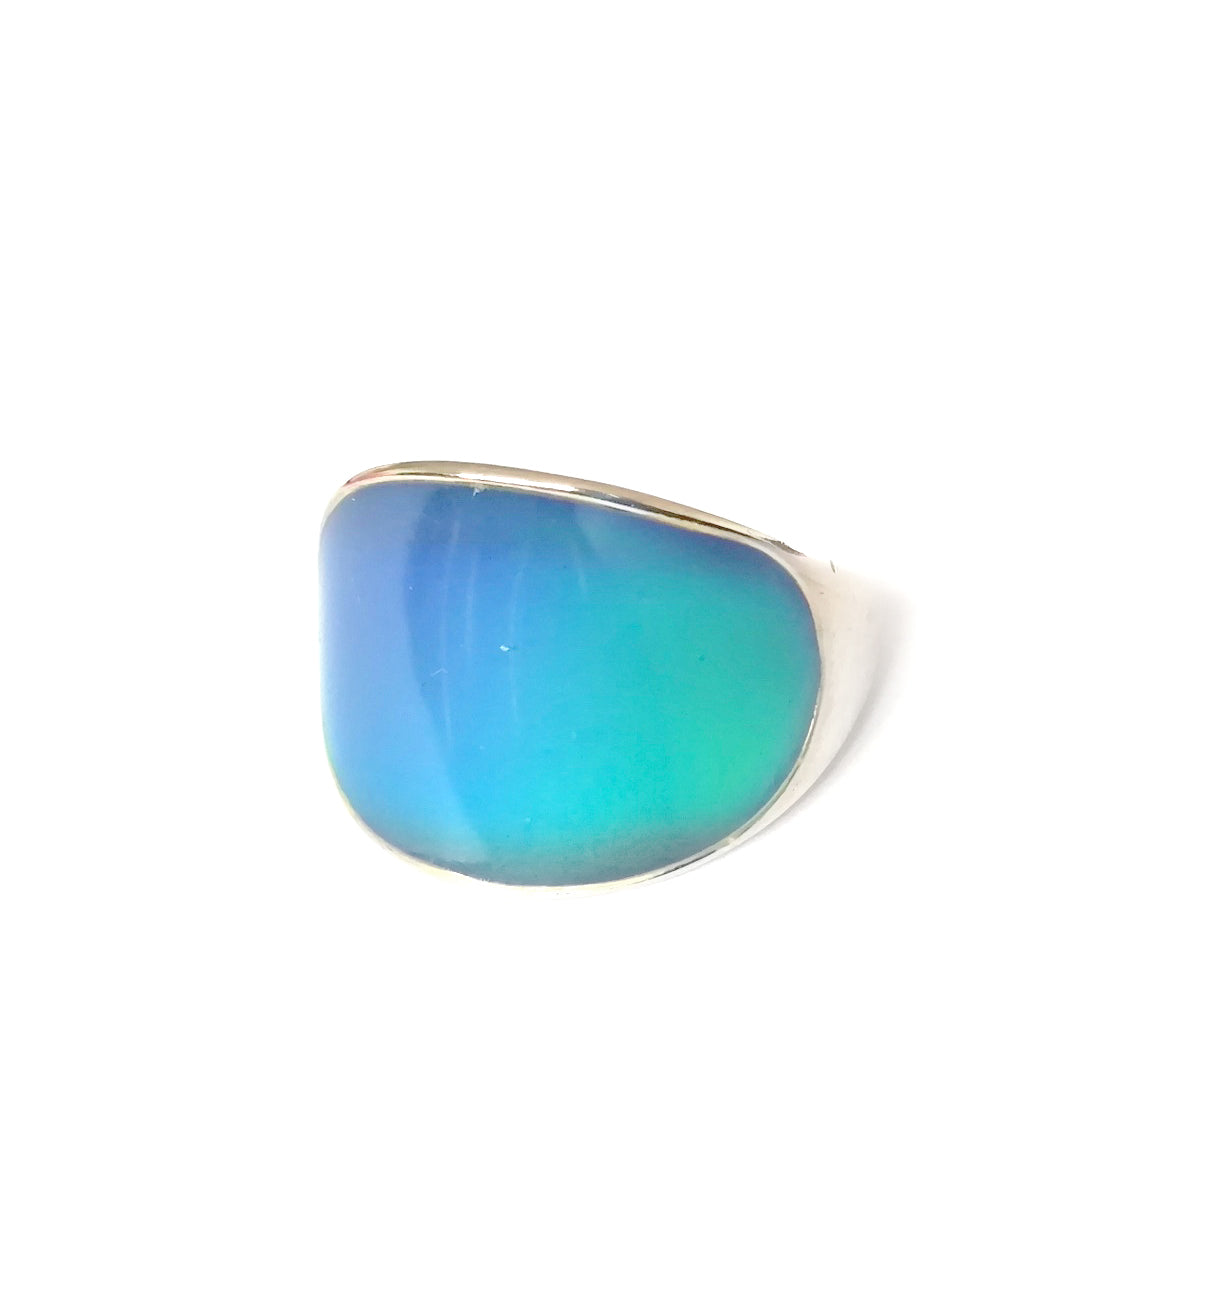 Avon - Rehana Mood Ring €11.75 Comes in 3 sizes 6, 8 and... | Facebook